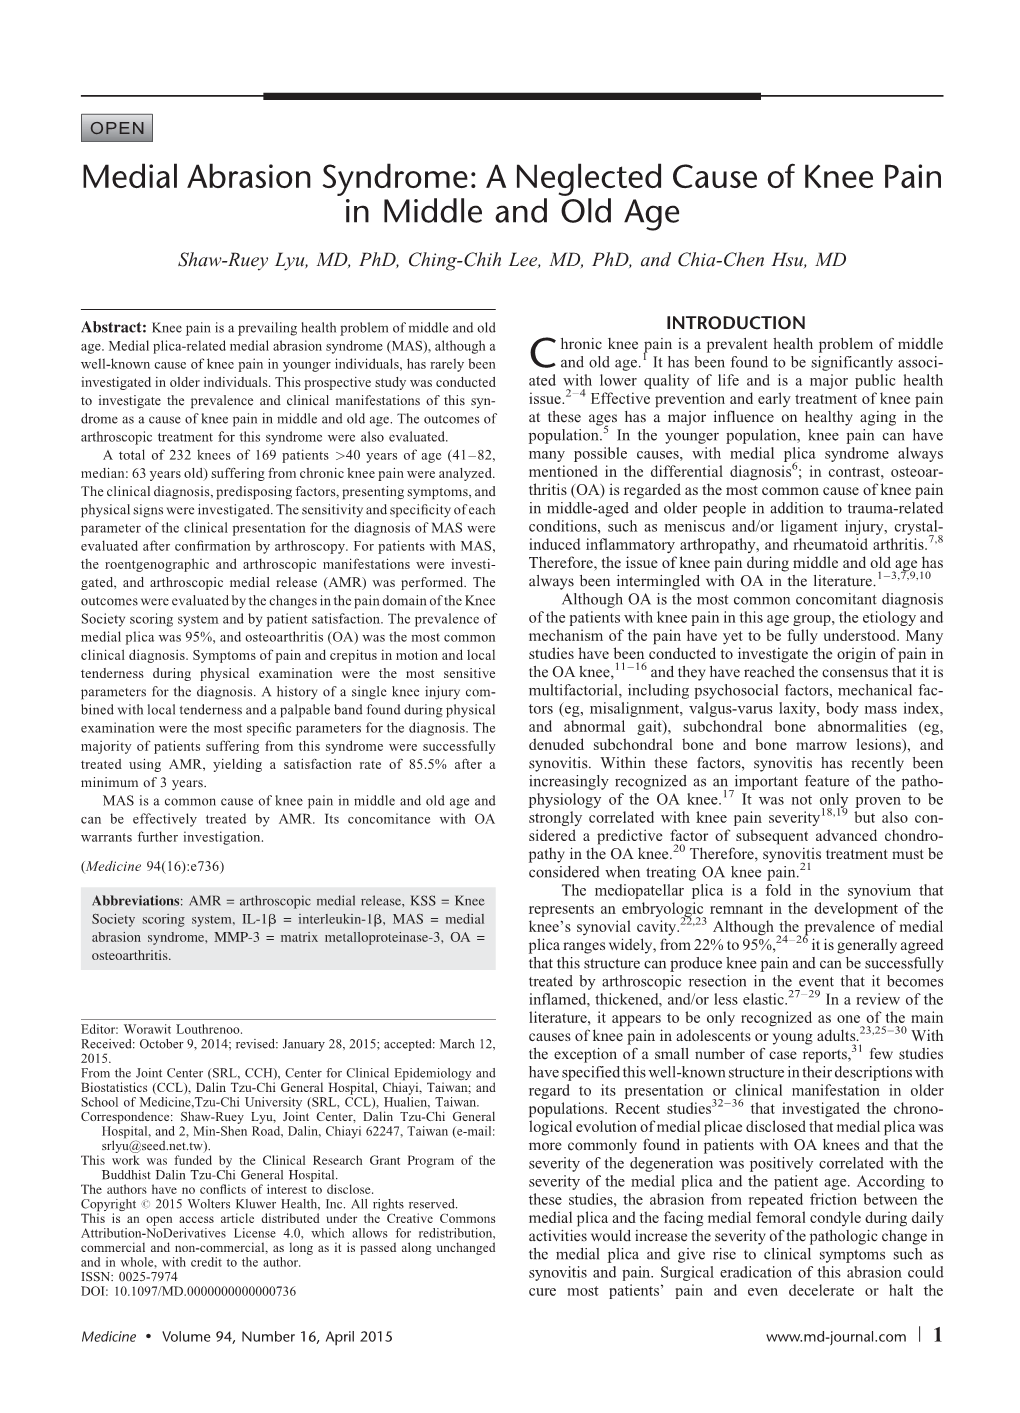 Medial Abrasion Syndrome: a Neglected Cause of Knee Pain in Middle and Old Age Shaw-Ruey Lyu, MD, Phd, Ching-Chih Lee, MD, Phd, and Chia-Chen Hsu, MD